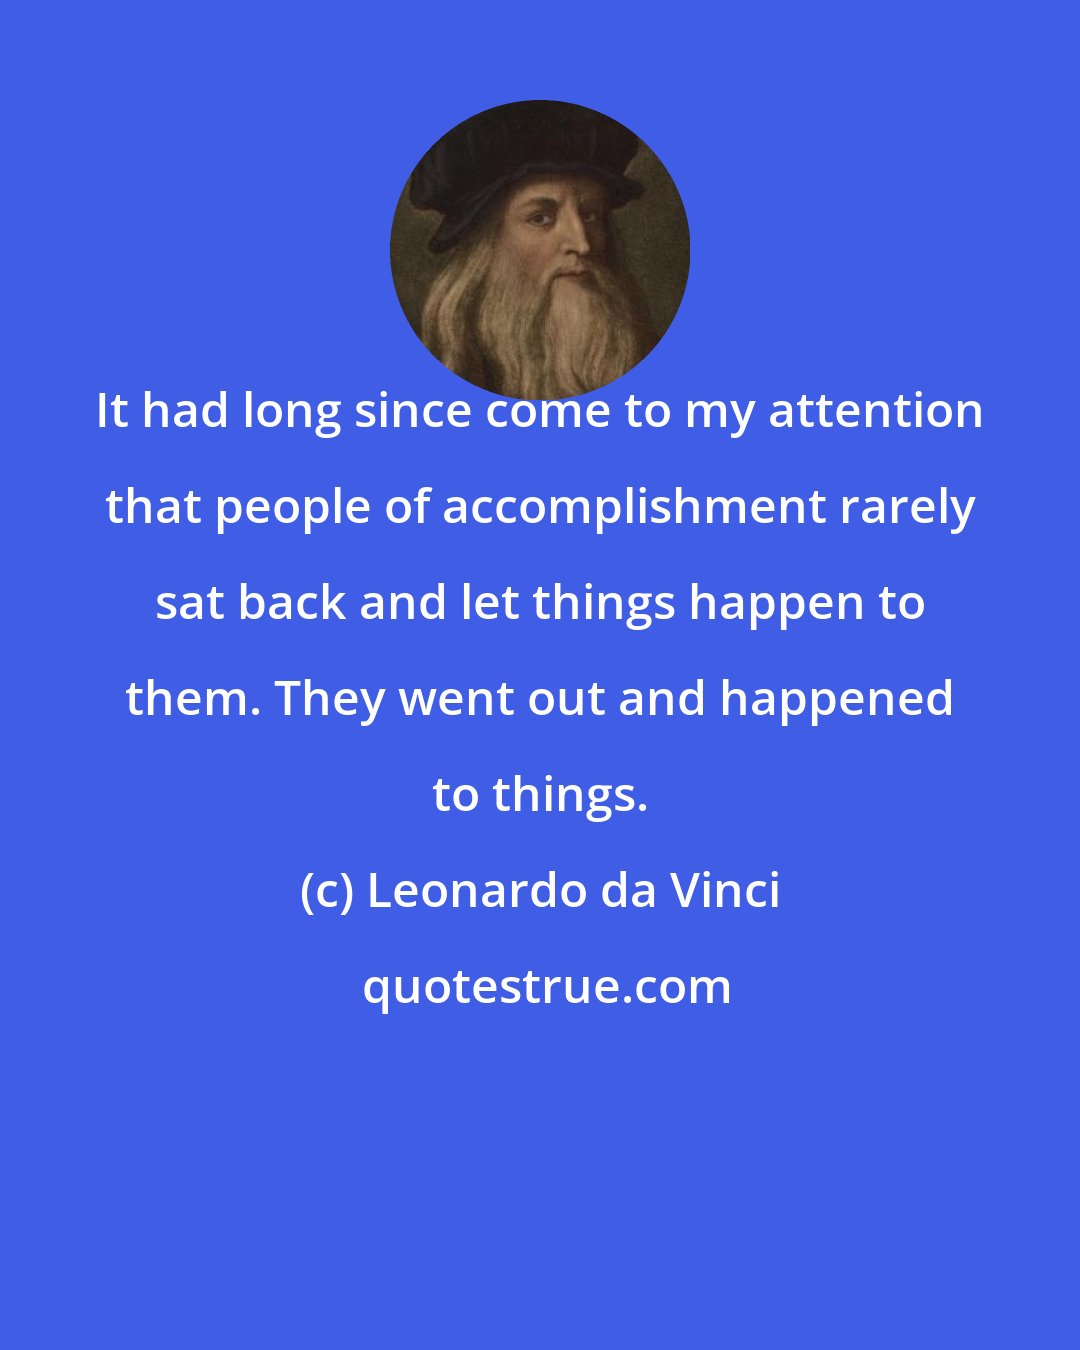 Leonardo da Vinci: It had long since come to my attention that people of accomplishment rarely sat back and let things happen to them. They went out and happened to things.